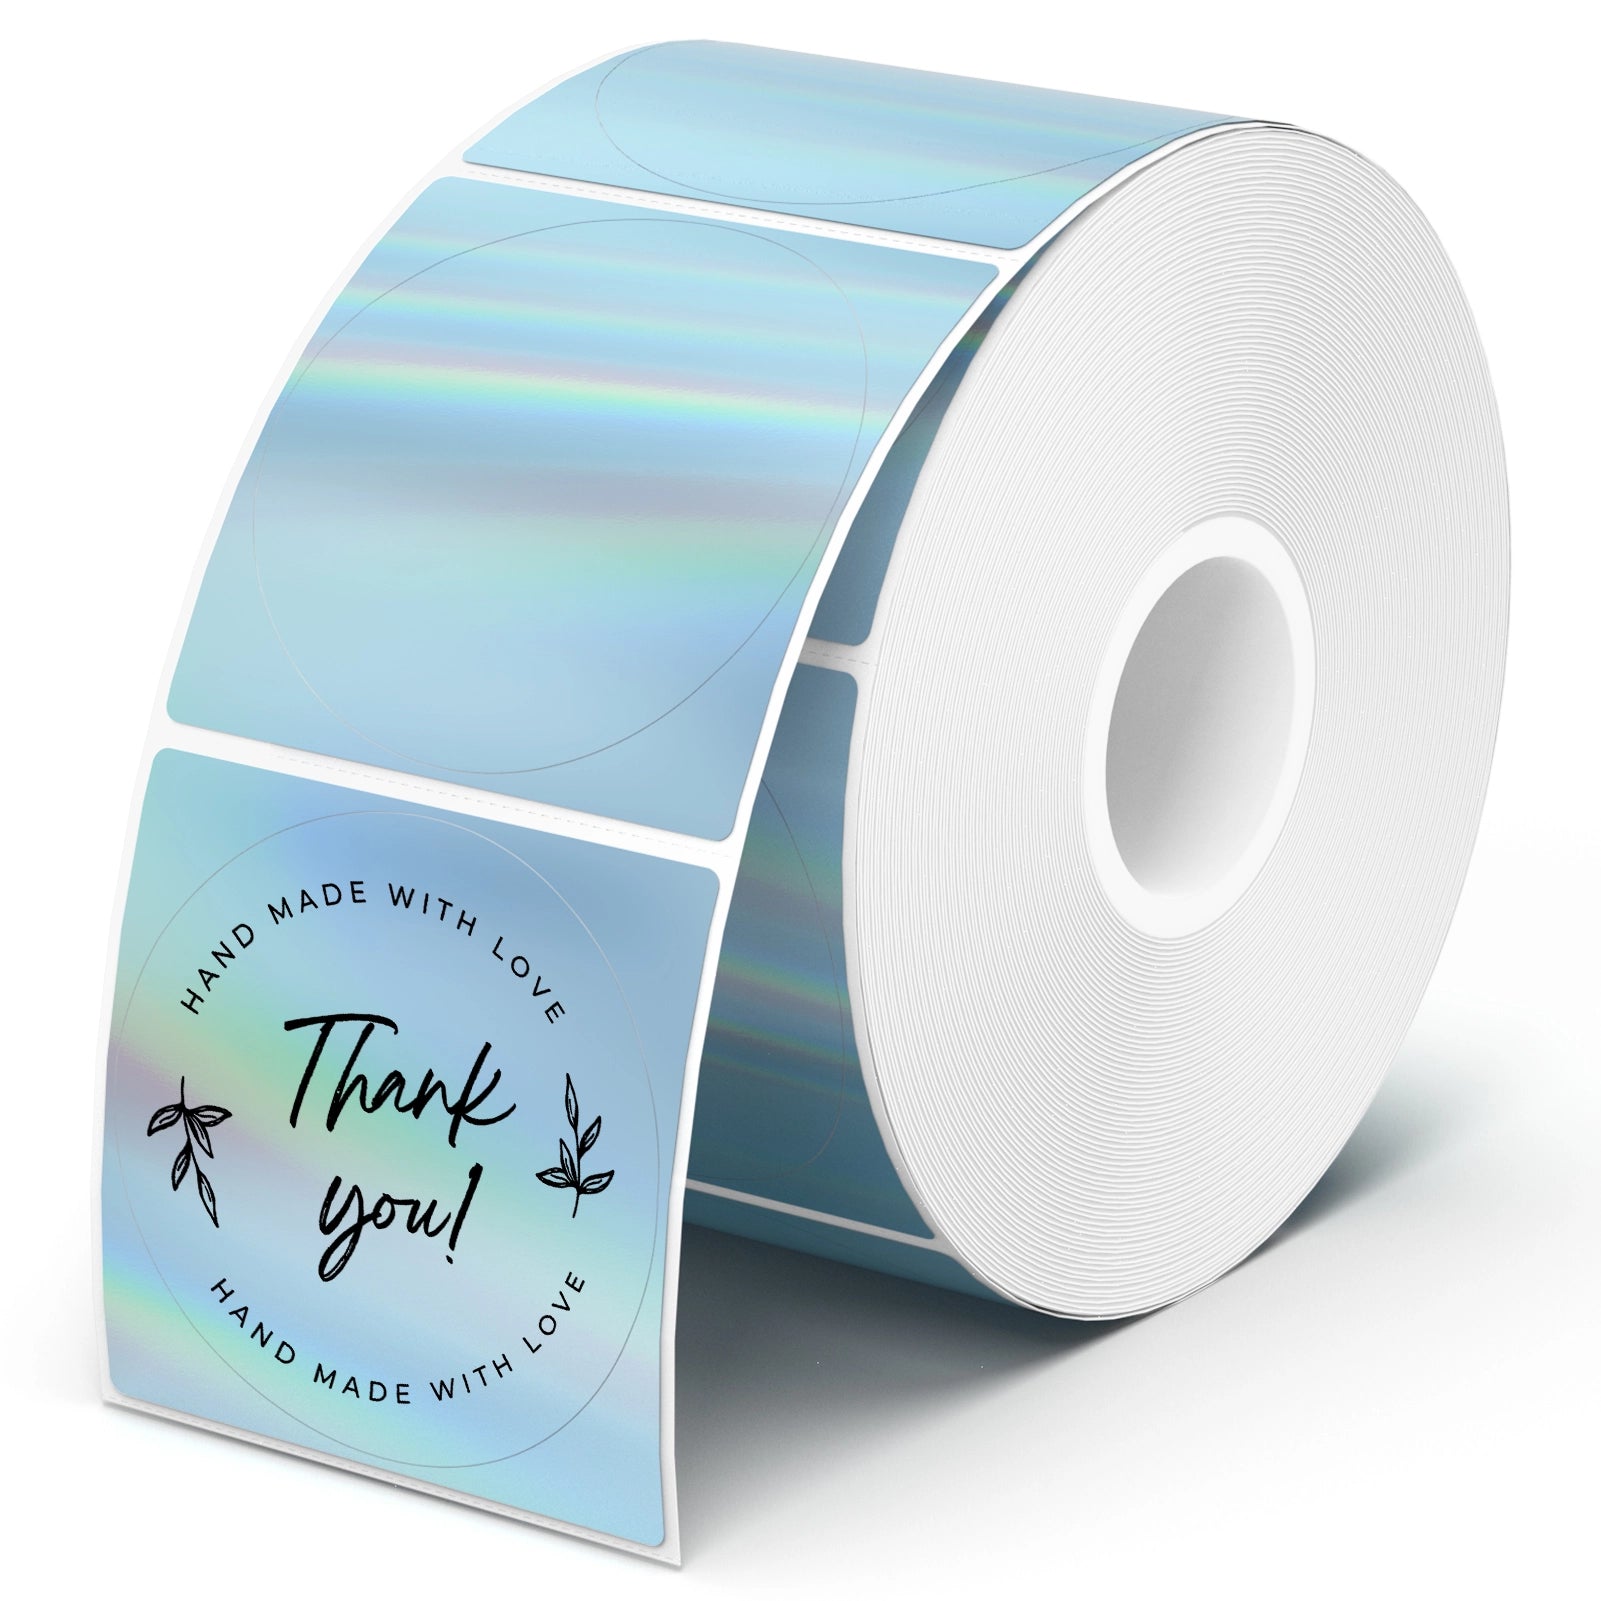 MUNBYN 2" blue holographic labels feature a mesmerizing design that changes colors with the light.